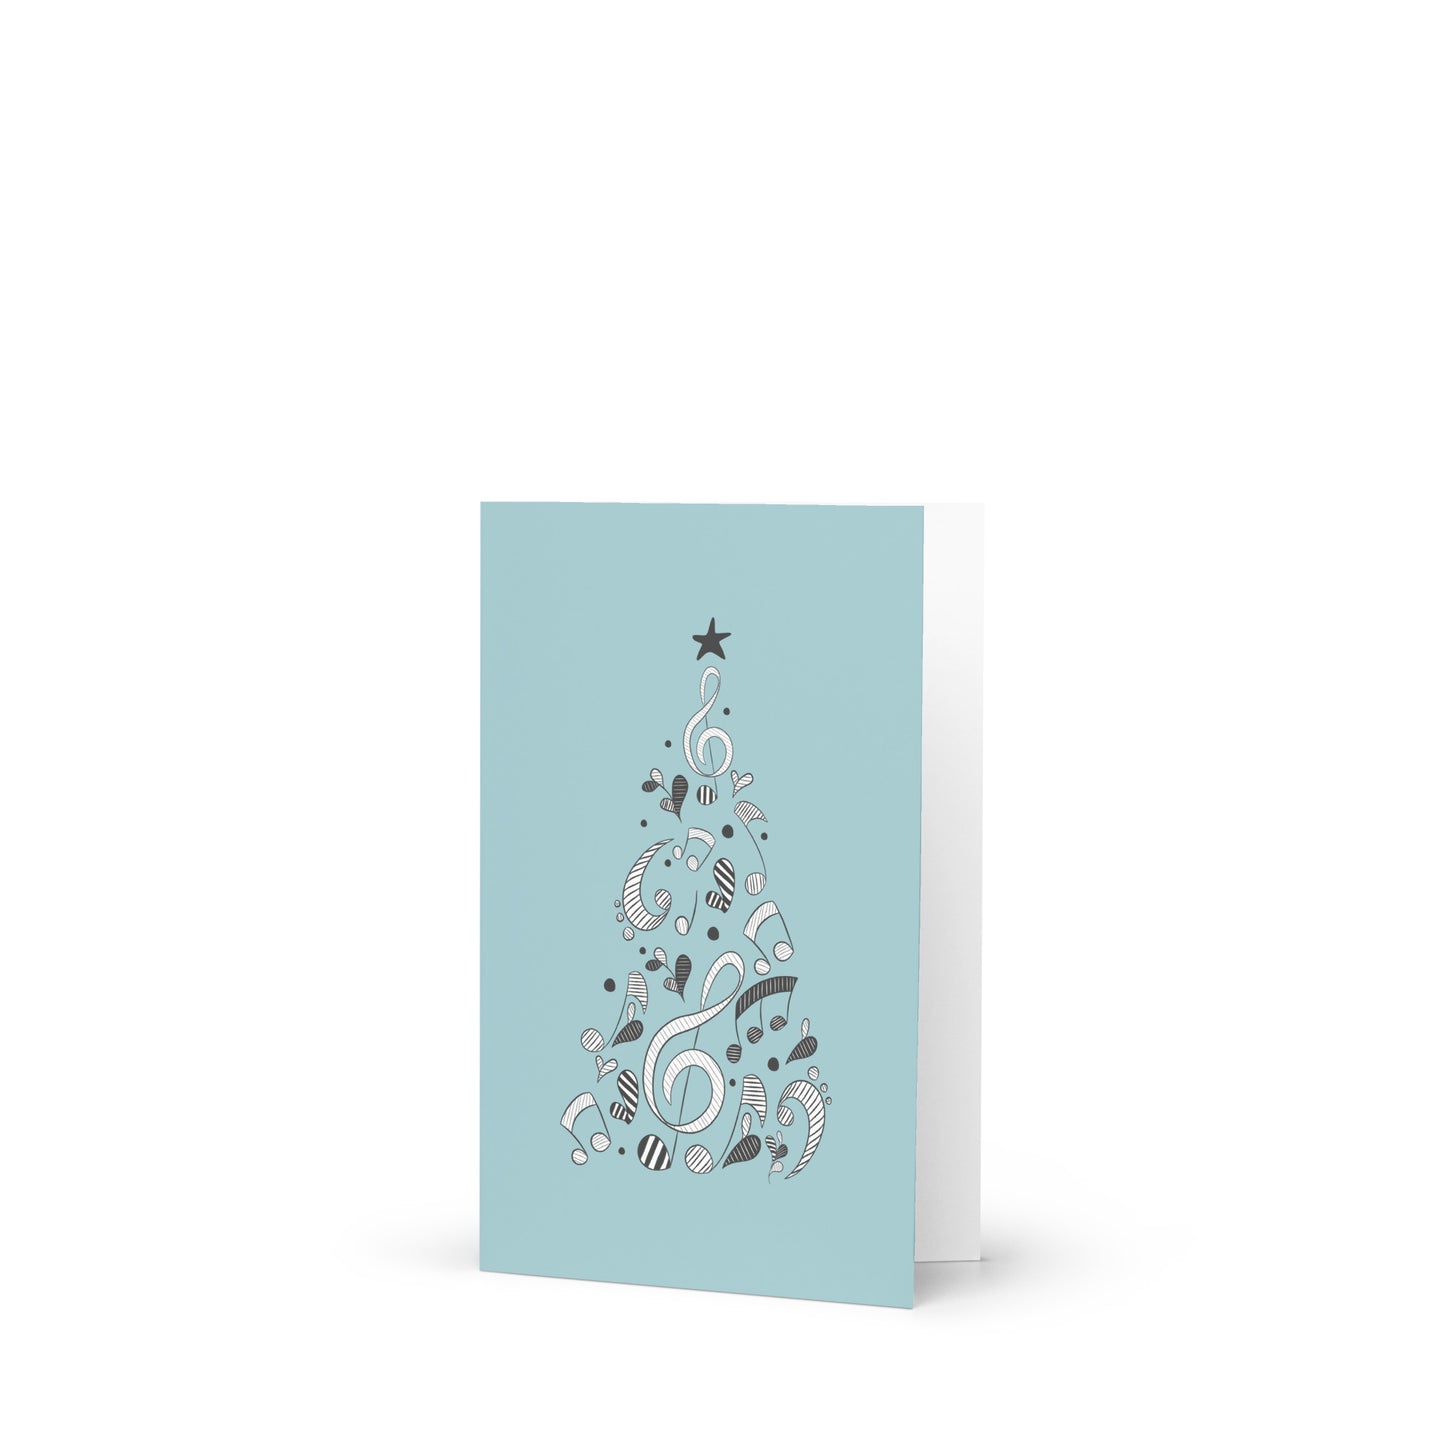 Melodic Merry Christmas Greeting Card with Music Notation Symbols